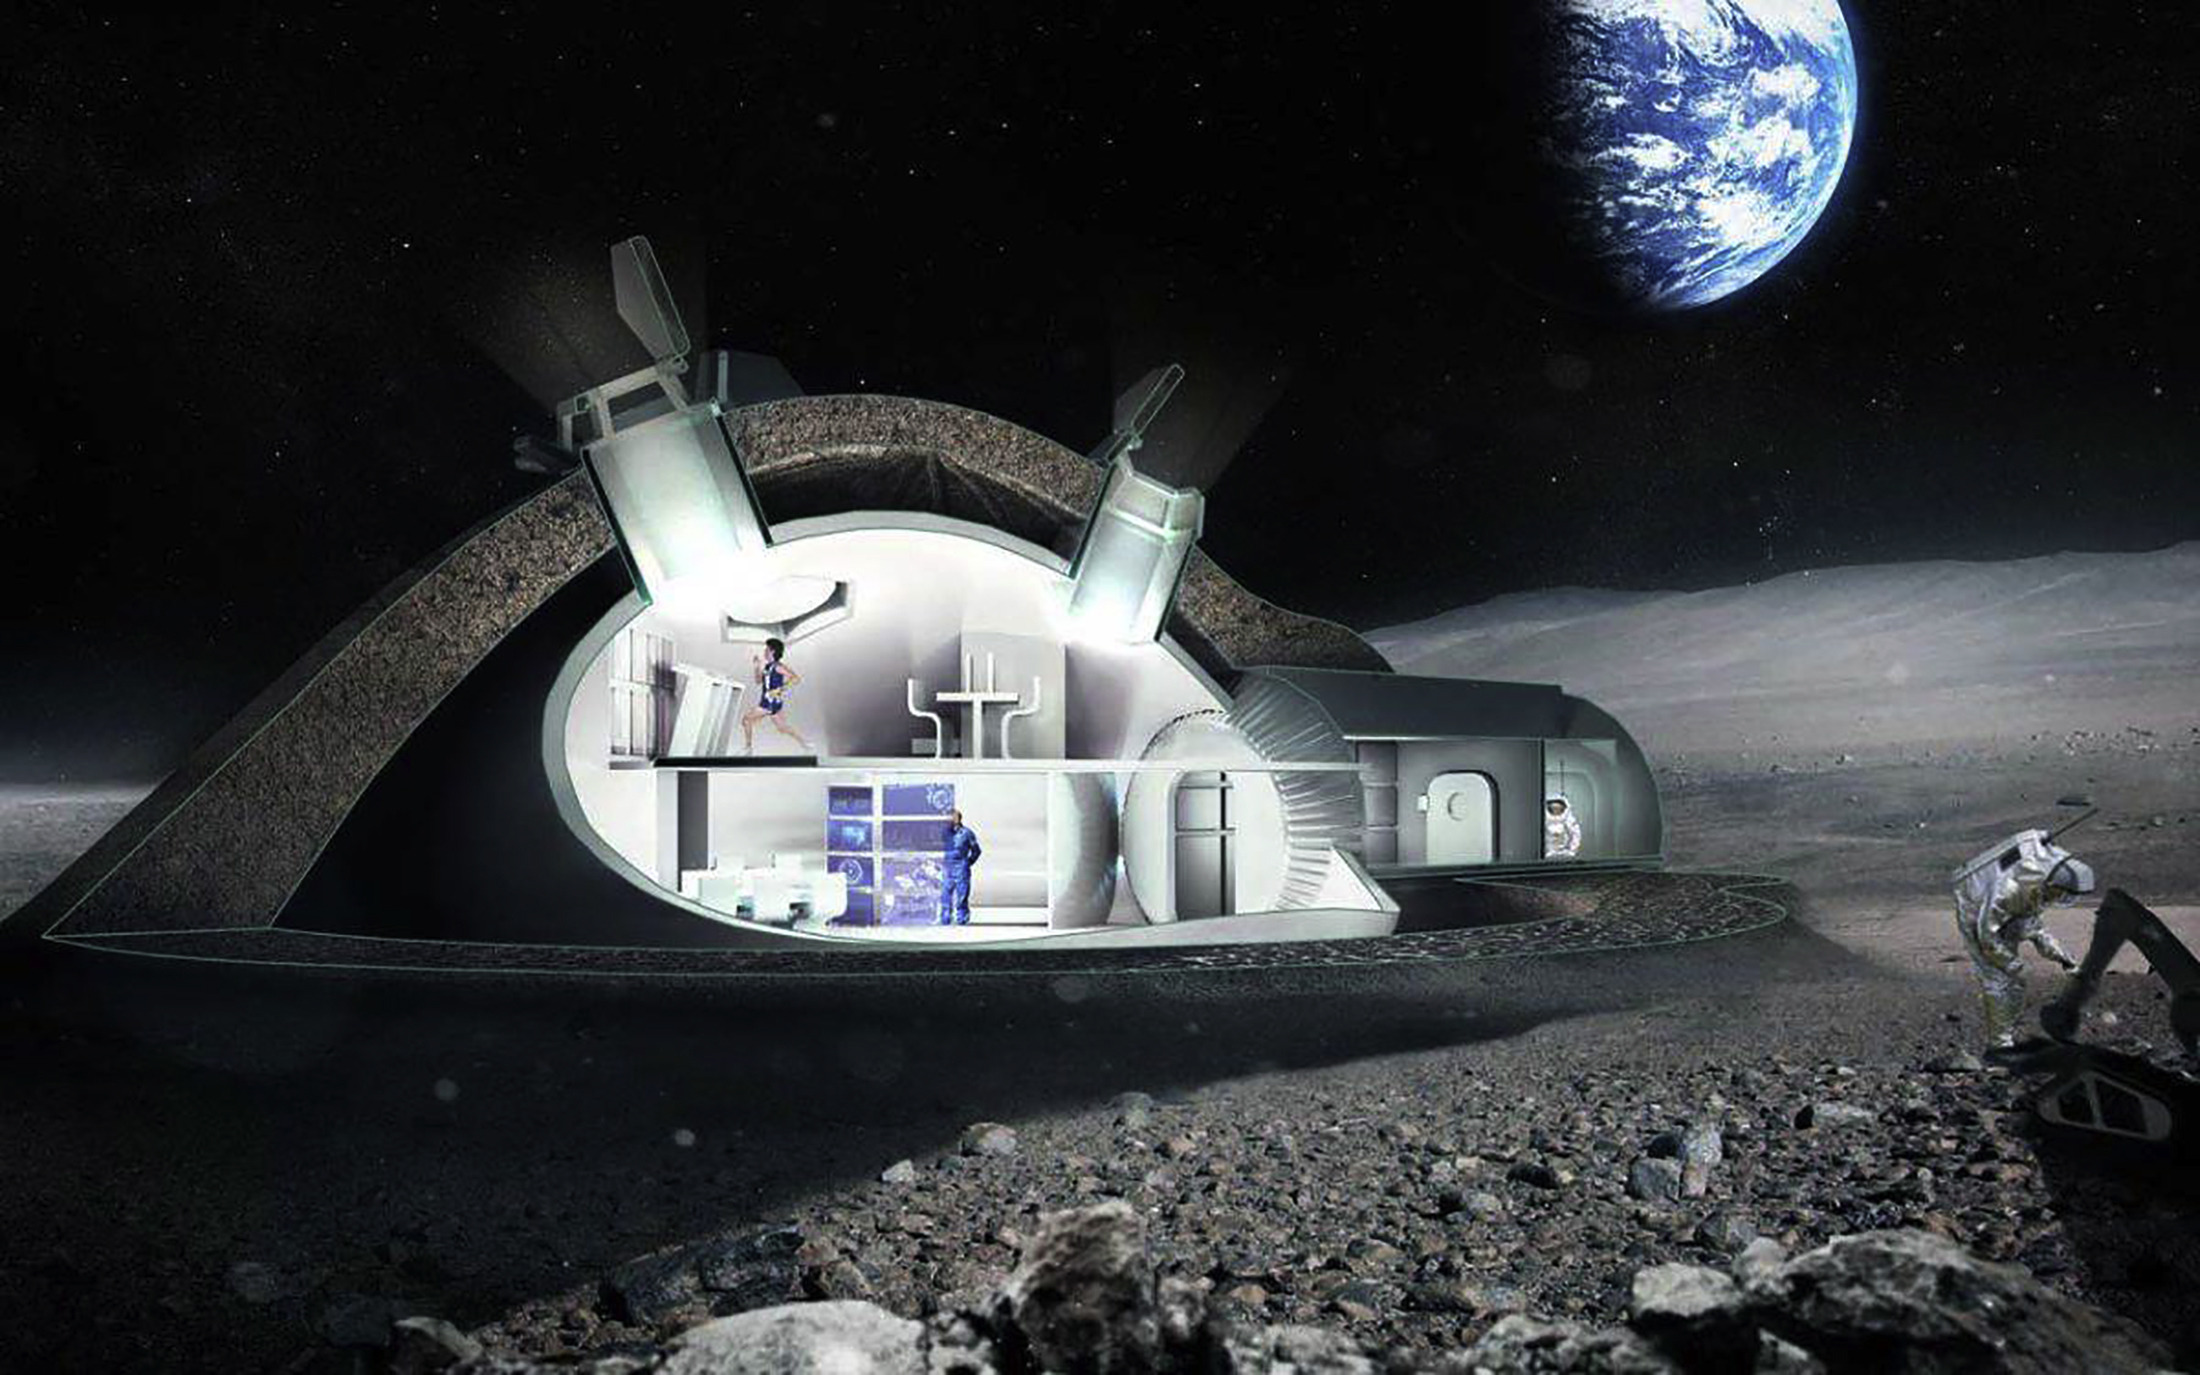 NASA: Before 2030, people will live on the moon